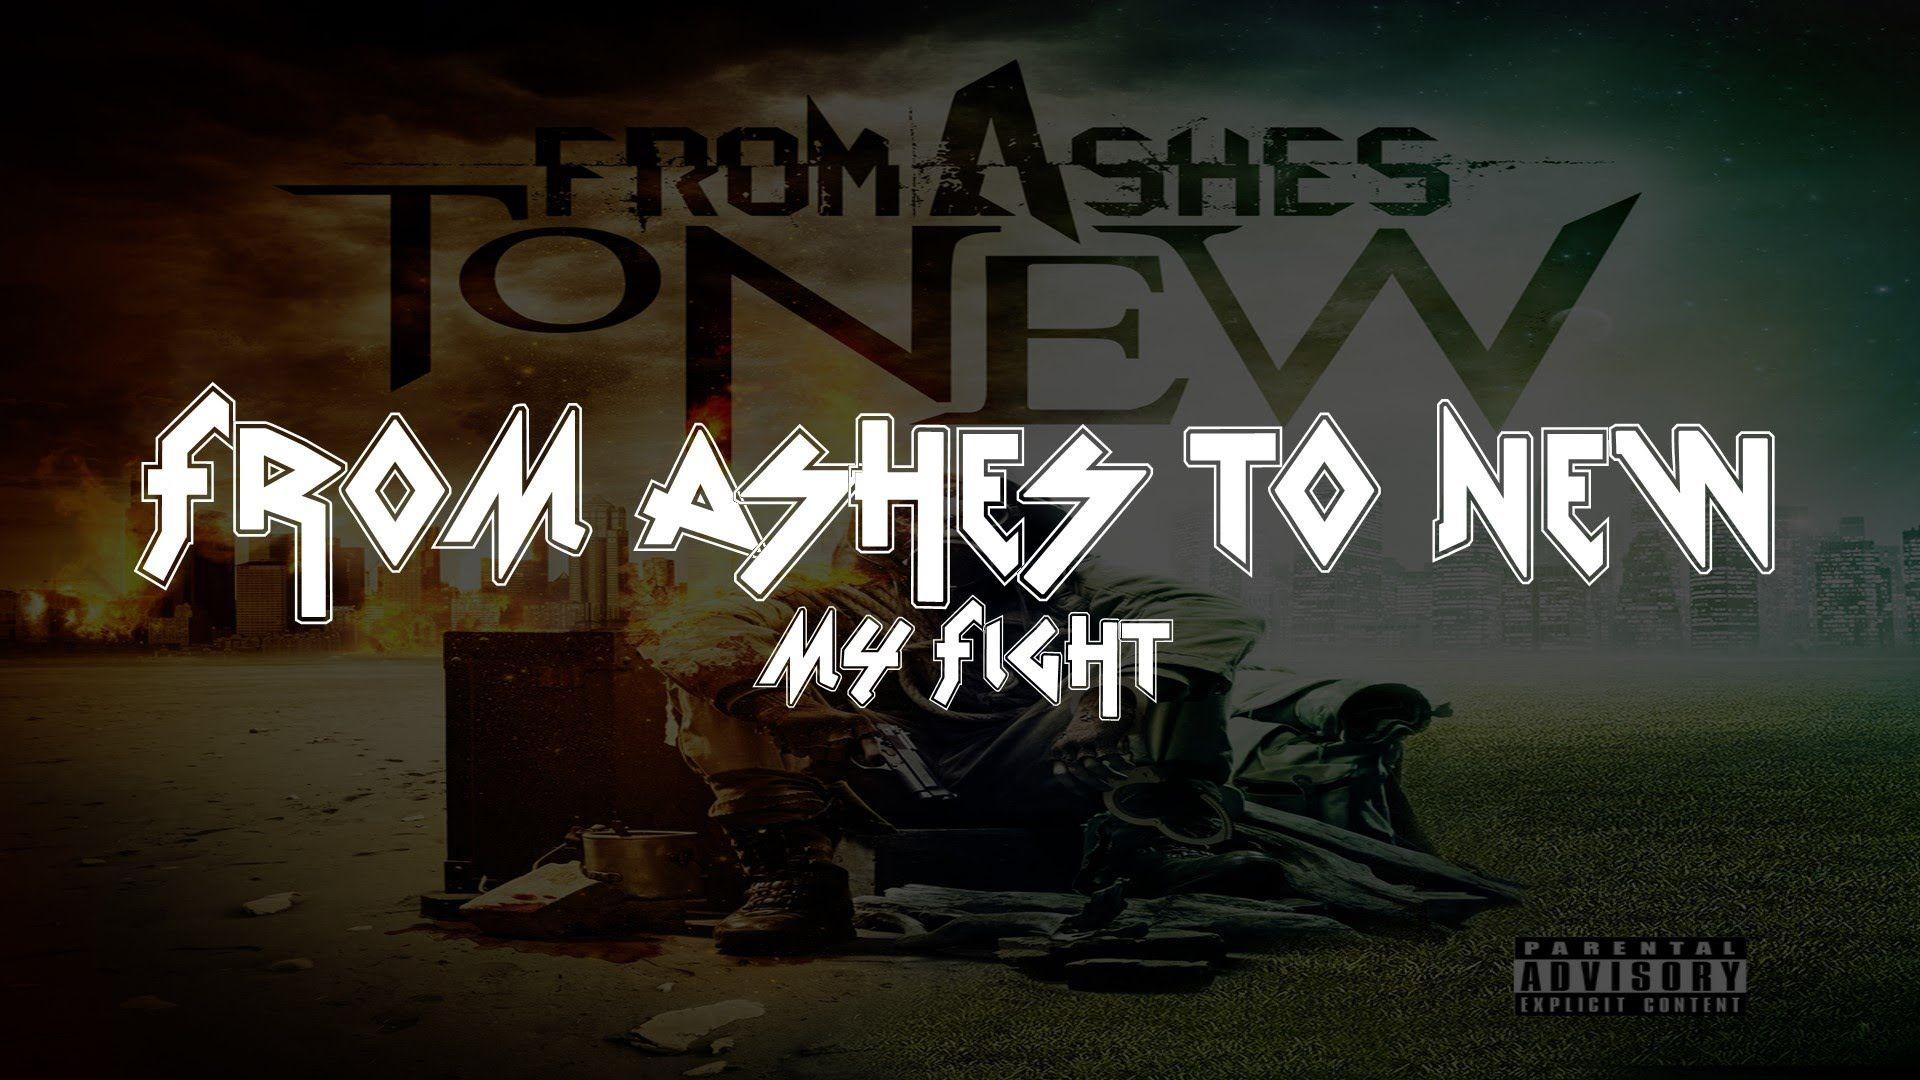 From Ashes to New Fight [Lyrics Video] [Full HD]